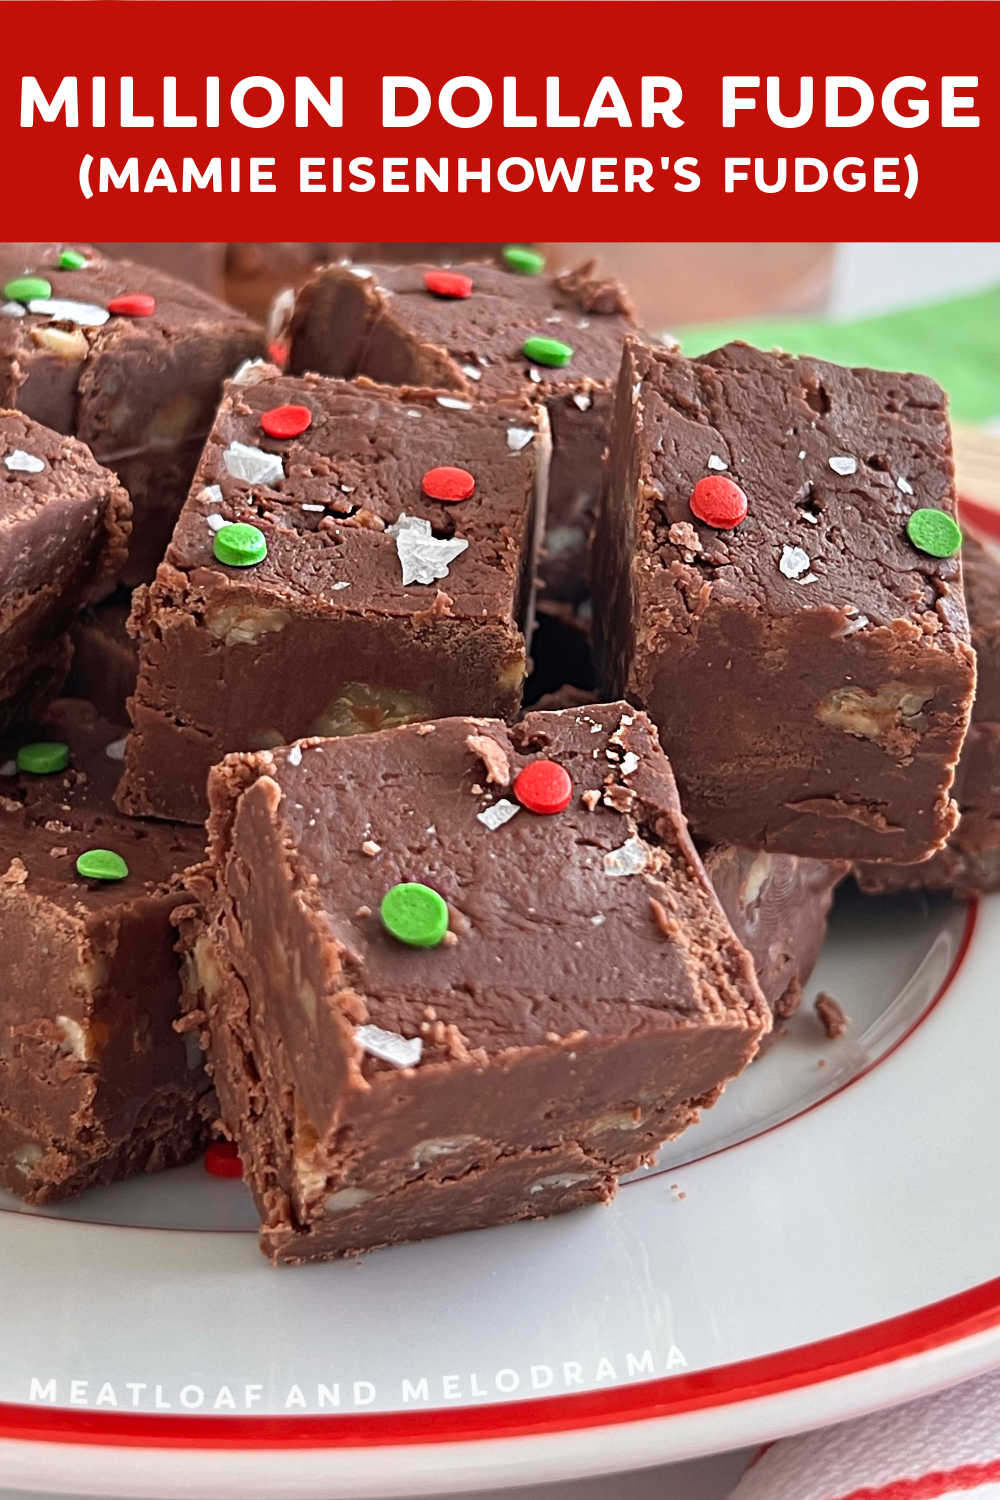 This Million Dollar Fudge Recipe, also known as Mamie Eisenhower's fudge, makes the best fudge for holiday gifts. It's soft, sweet and delicious! This melt-in-your-mouth fudge will be one of your favorite recipes to make this holiday season! via @meamel